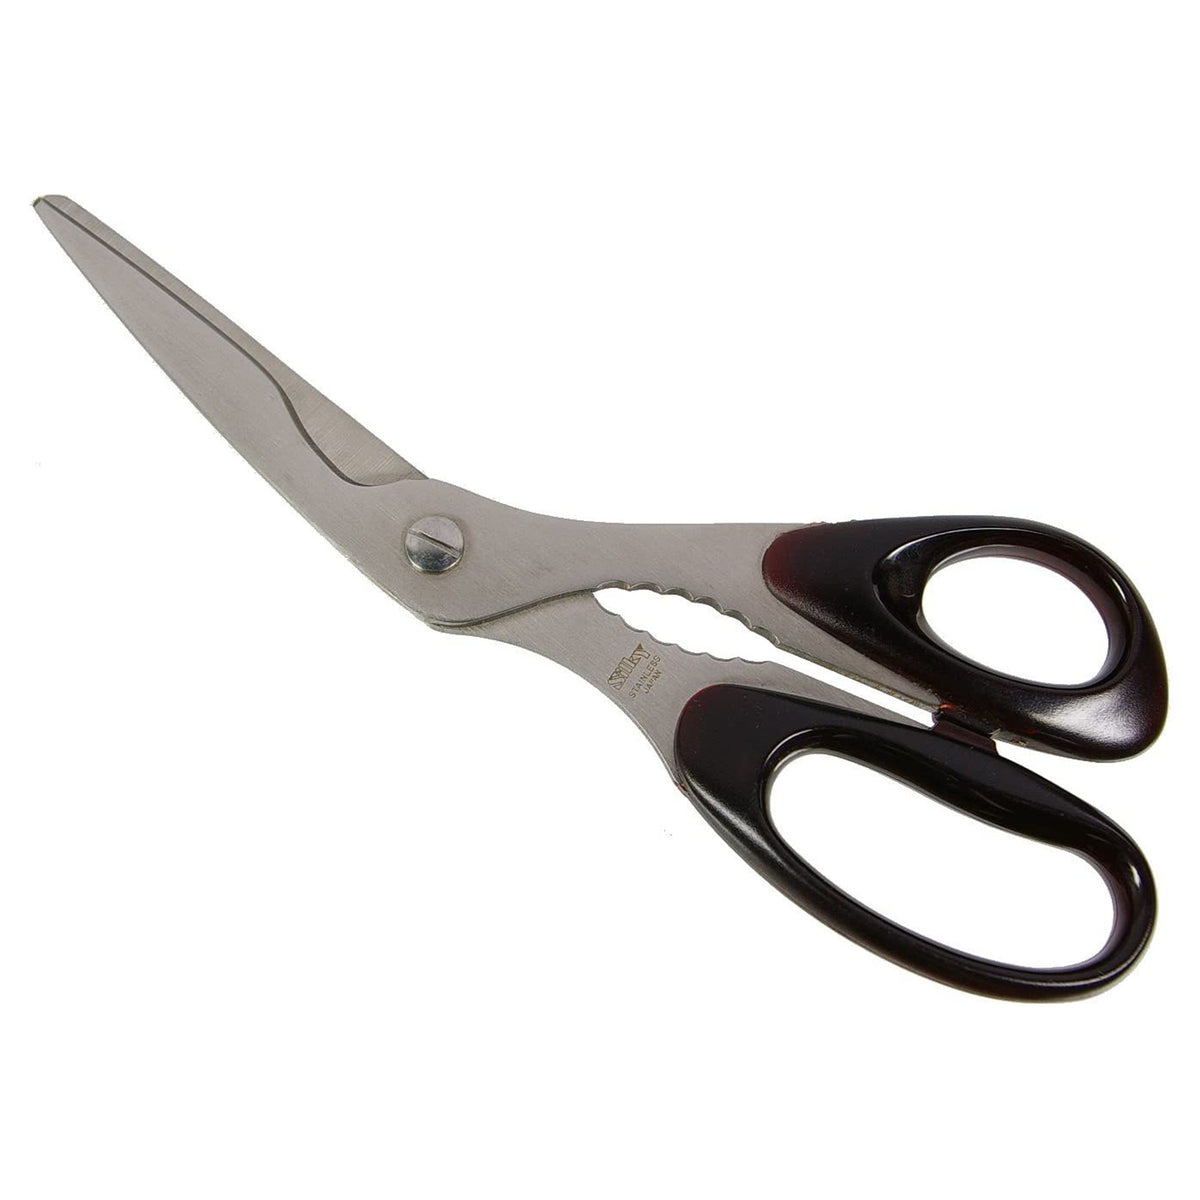 Marusho SILKY Stainless Steel Seafood Scissors